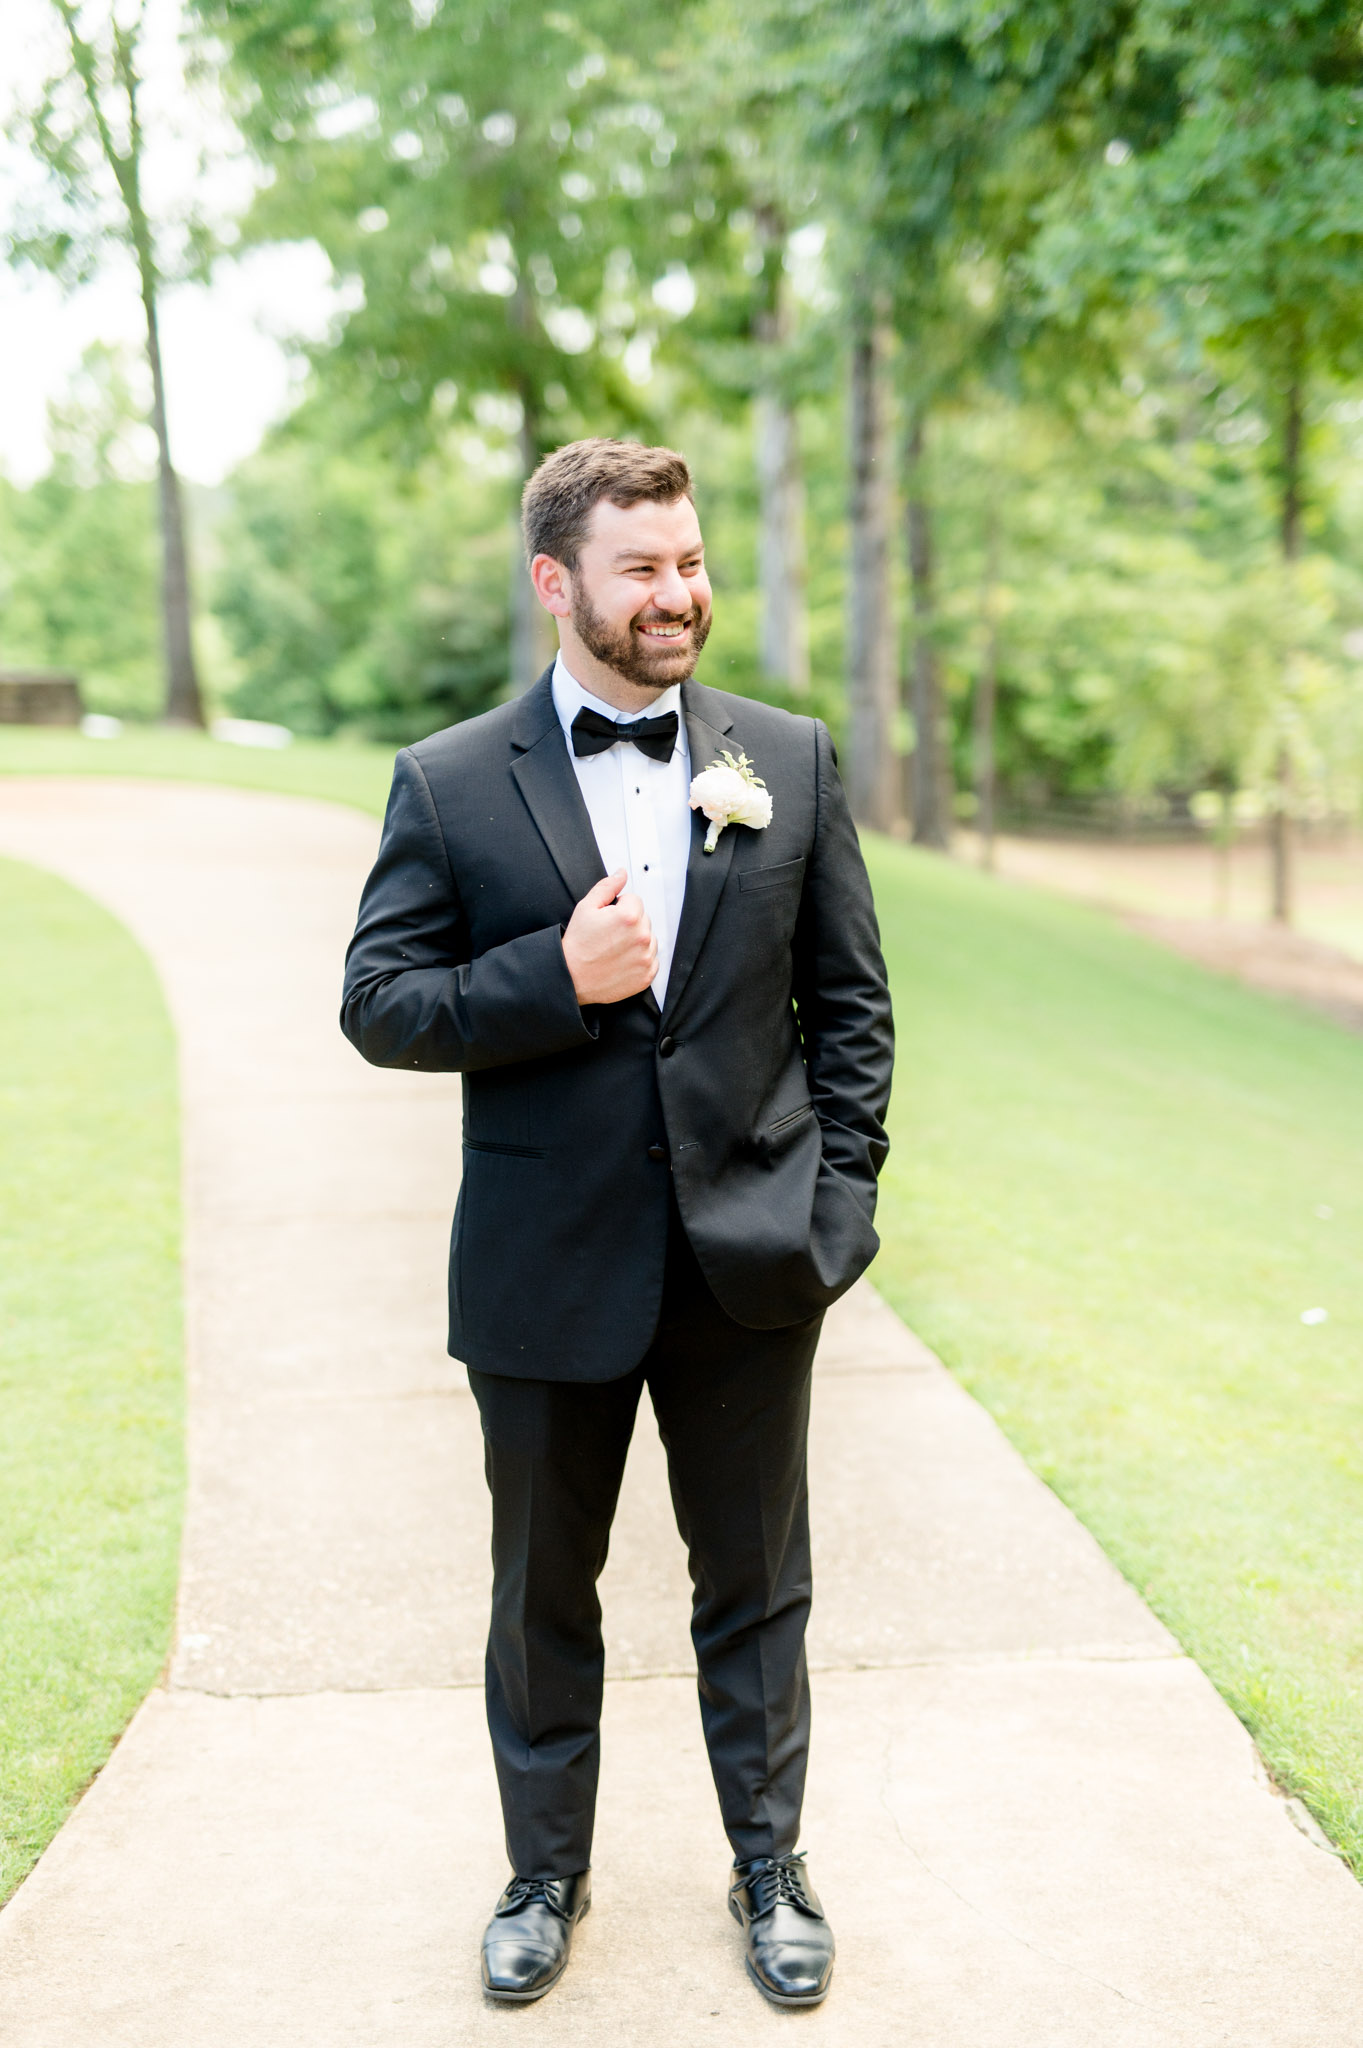 Groom holds lapel and looks off to side.